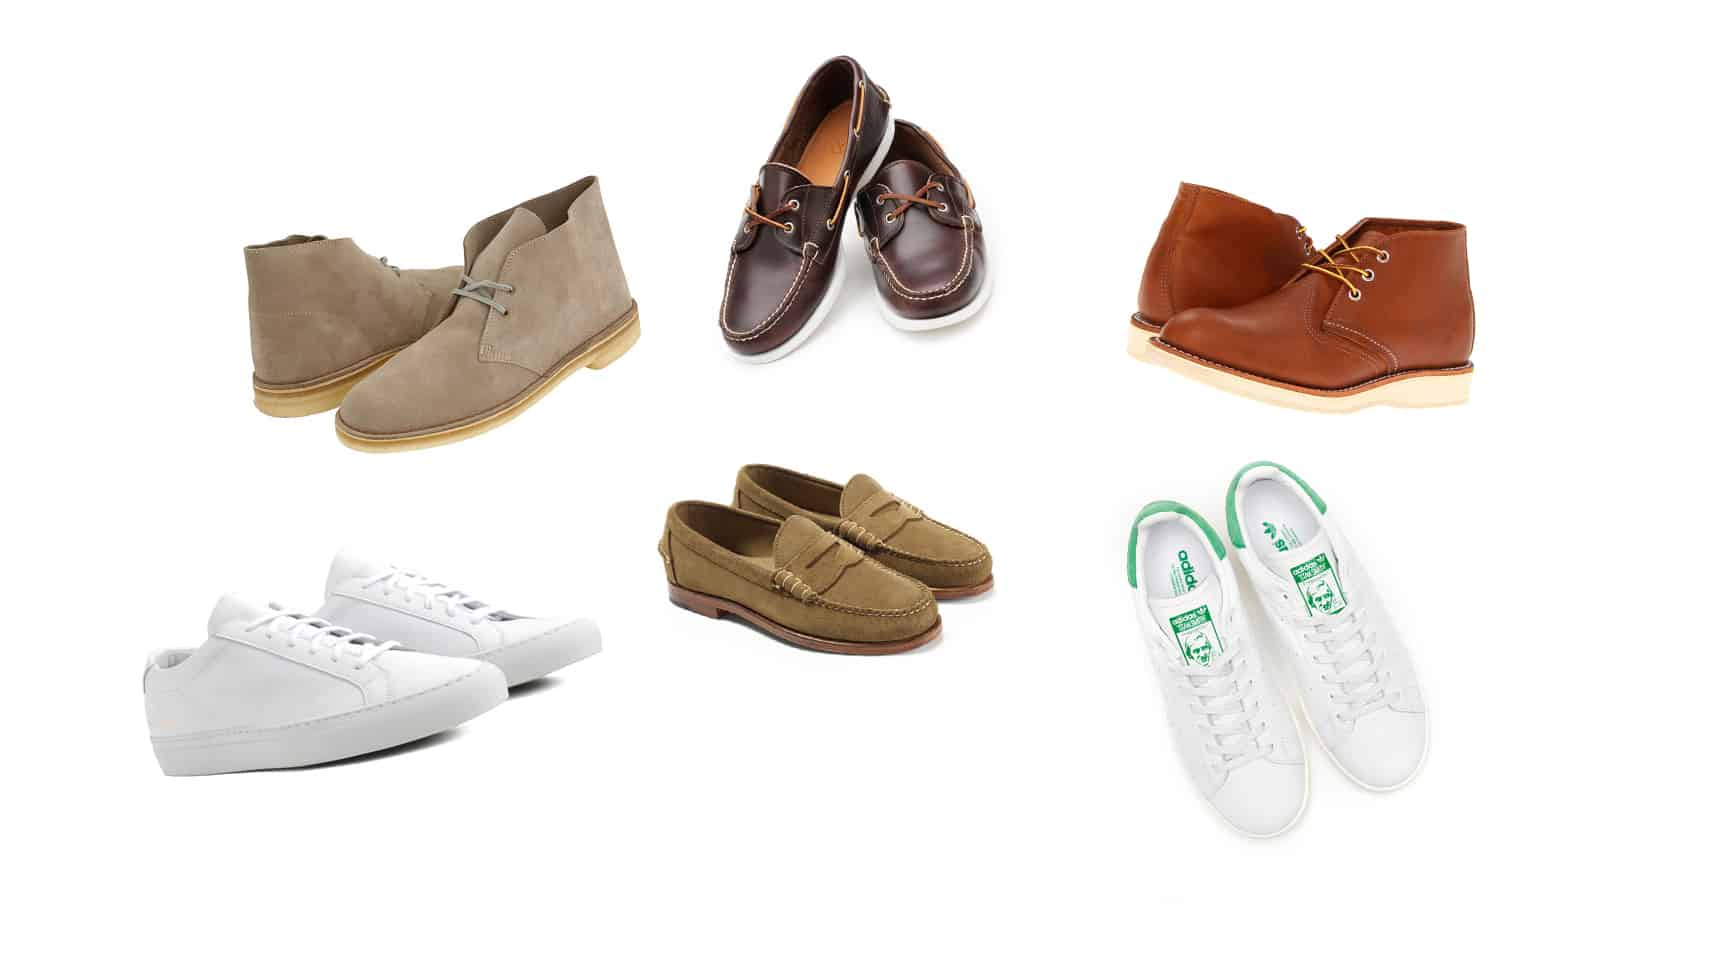 Spring Wardrobe: Footwear Guide Featuring Common Projects, Vans, Clarks ...